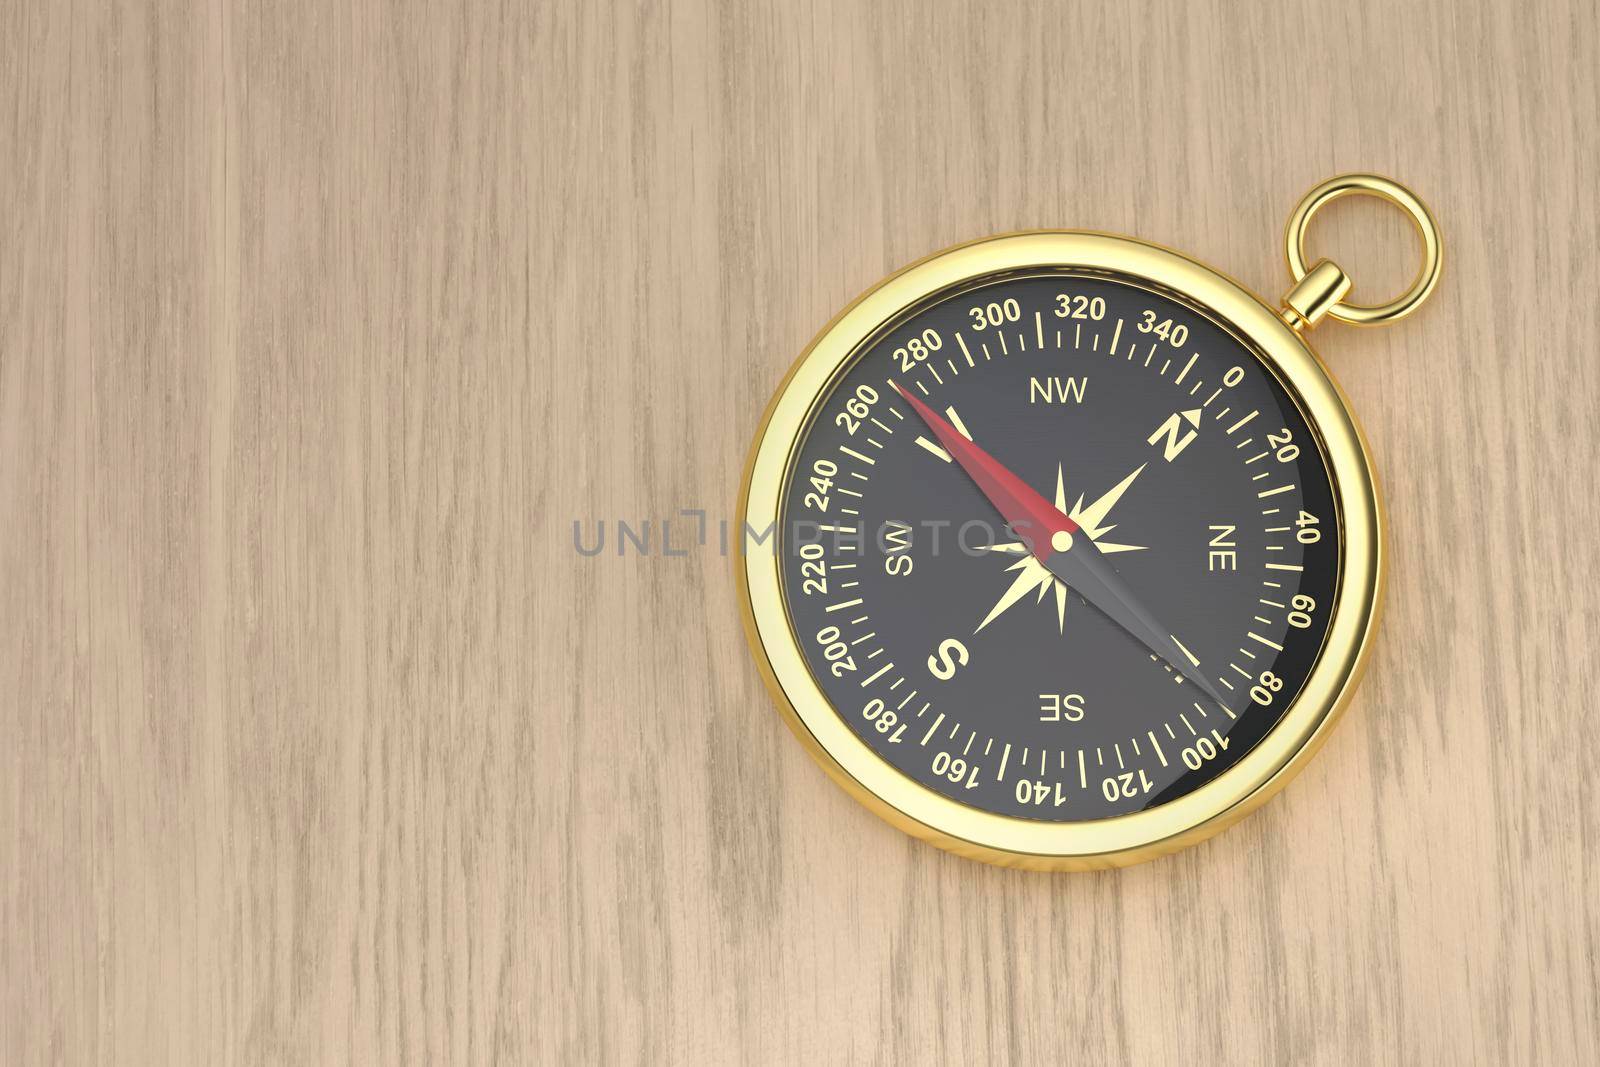 Gold compass on the wood table, top view